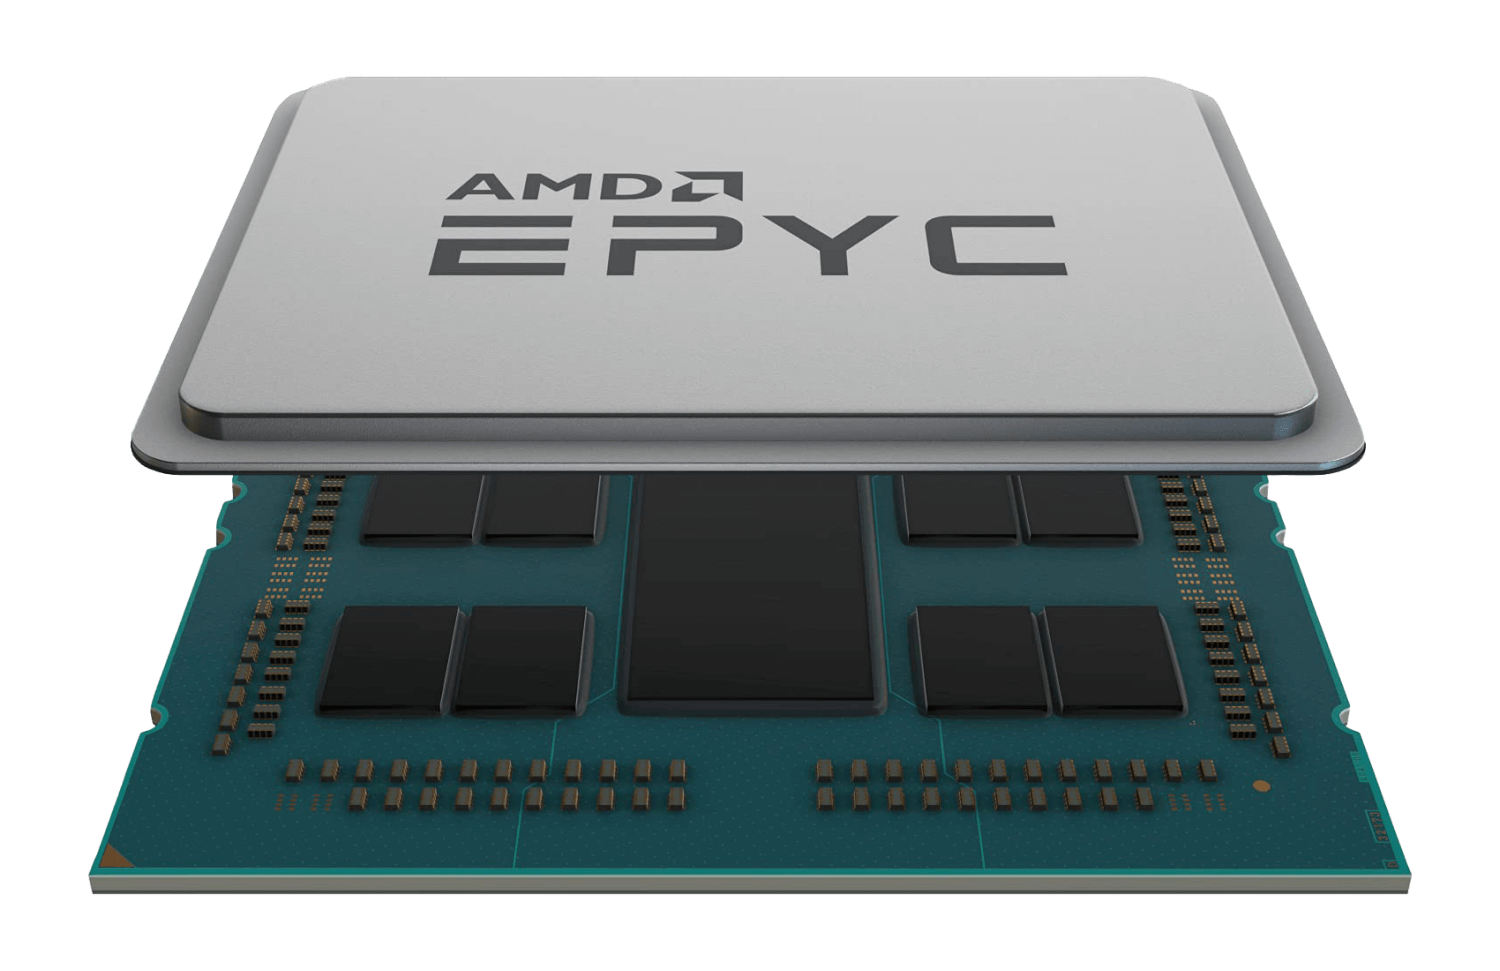 The AMD EPYC series of chips is designed using chiplets